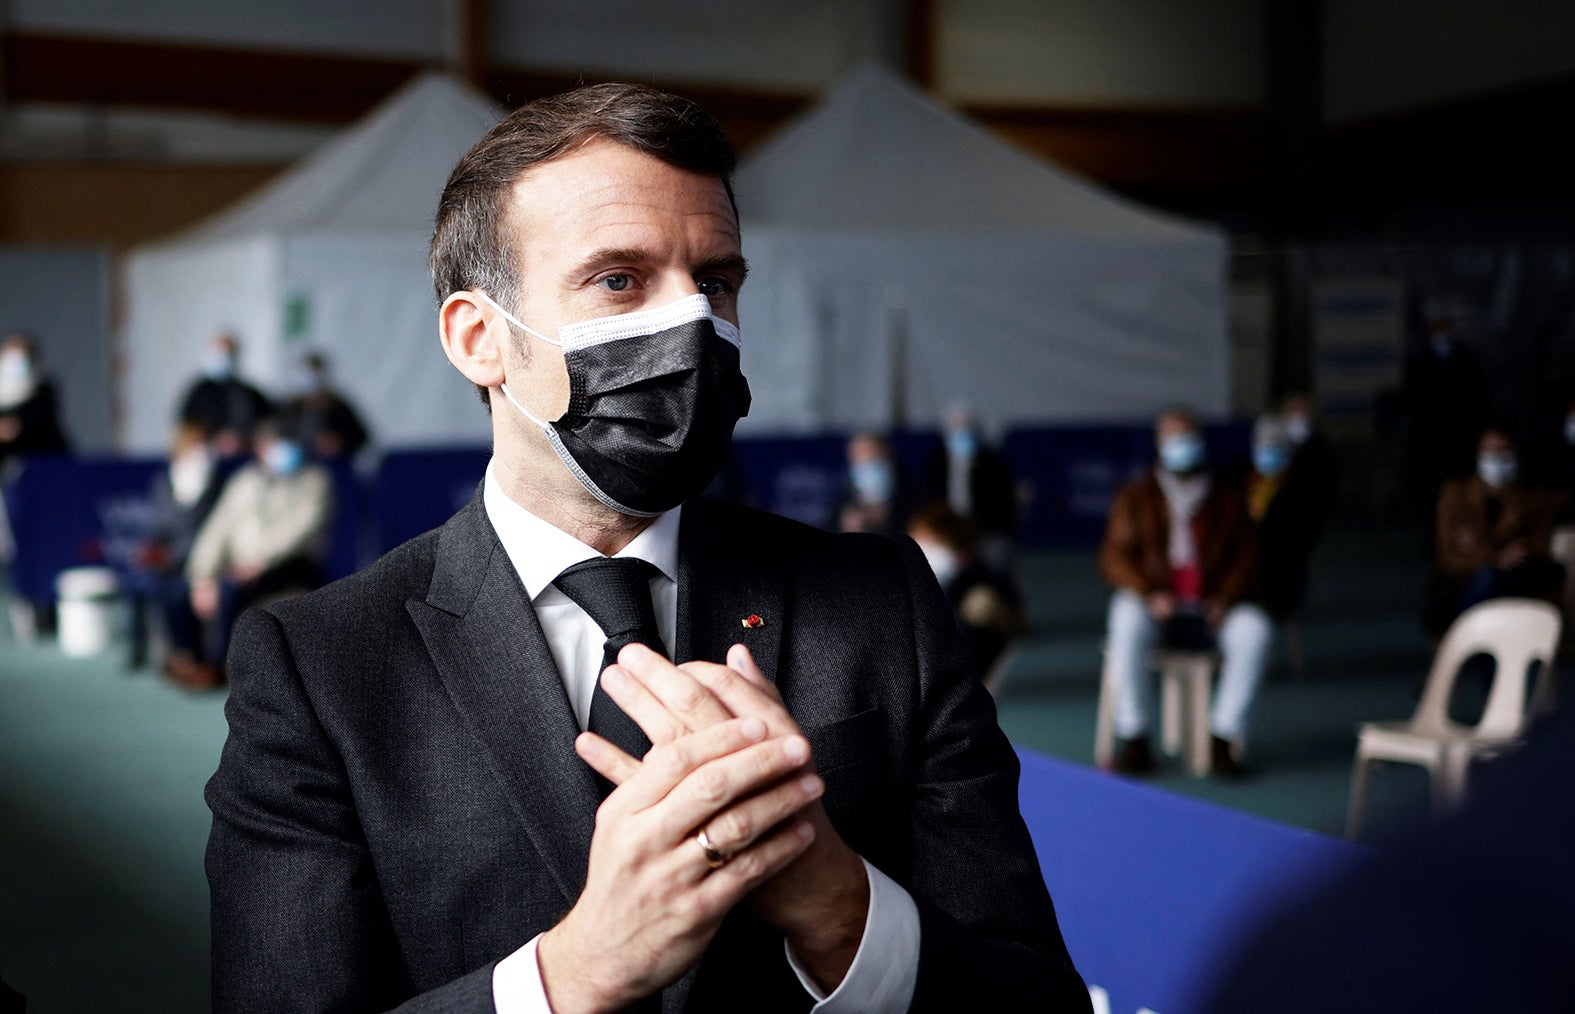 Emmanuel Macron's vow to "piss off" the unvaccinated won't convince many – but that's not the point